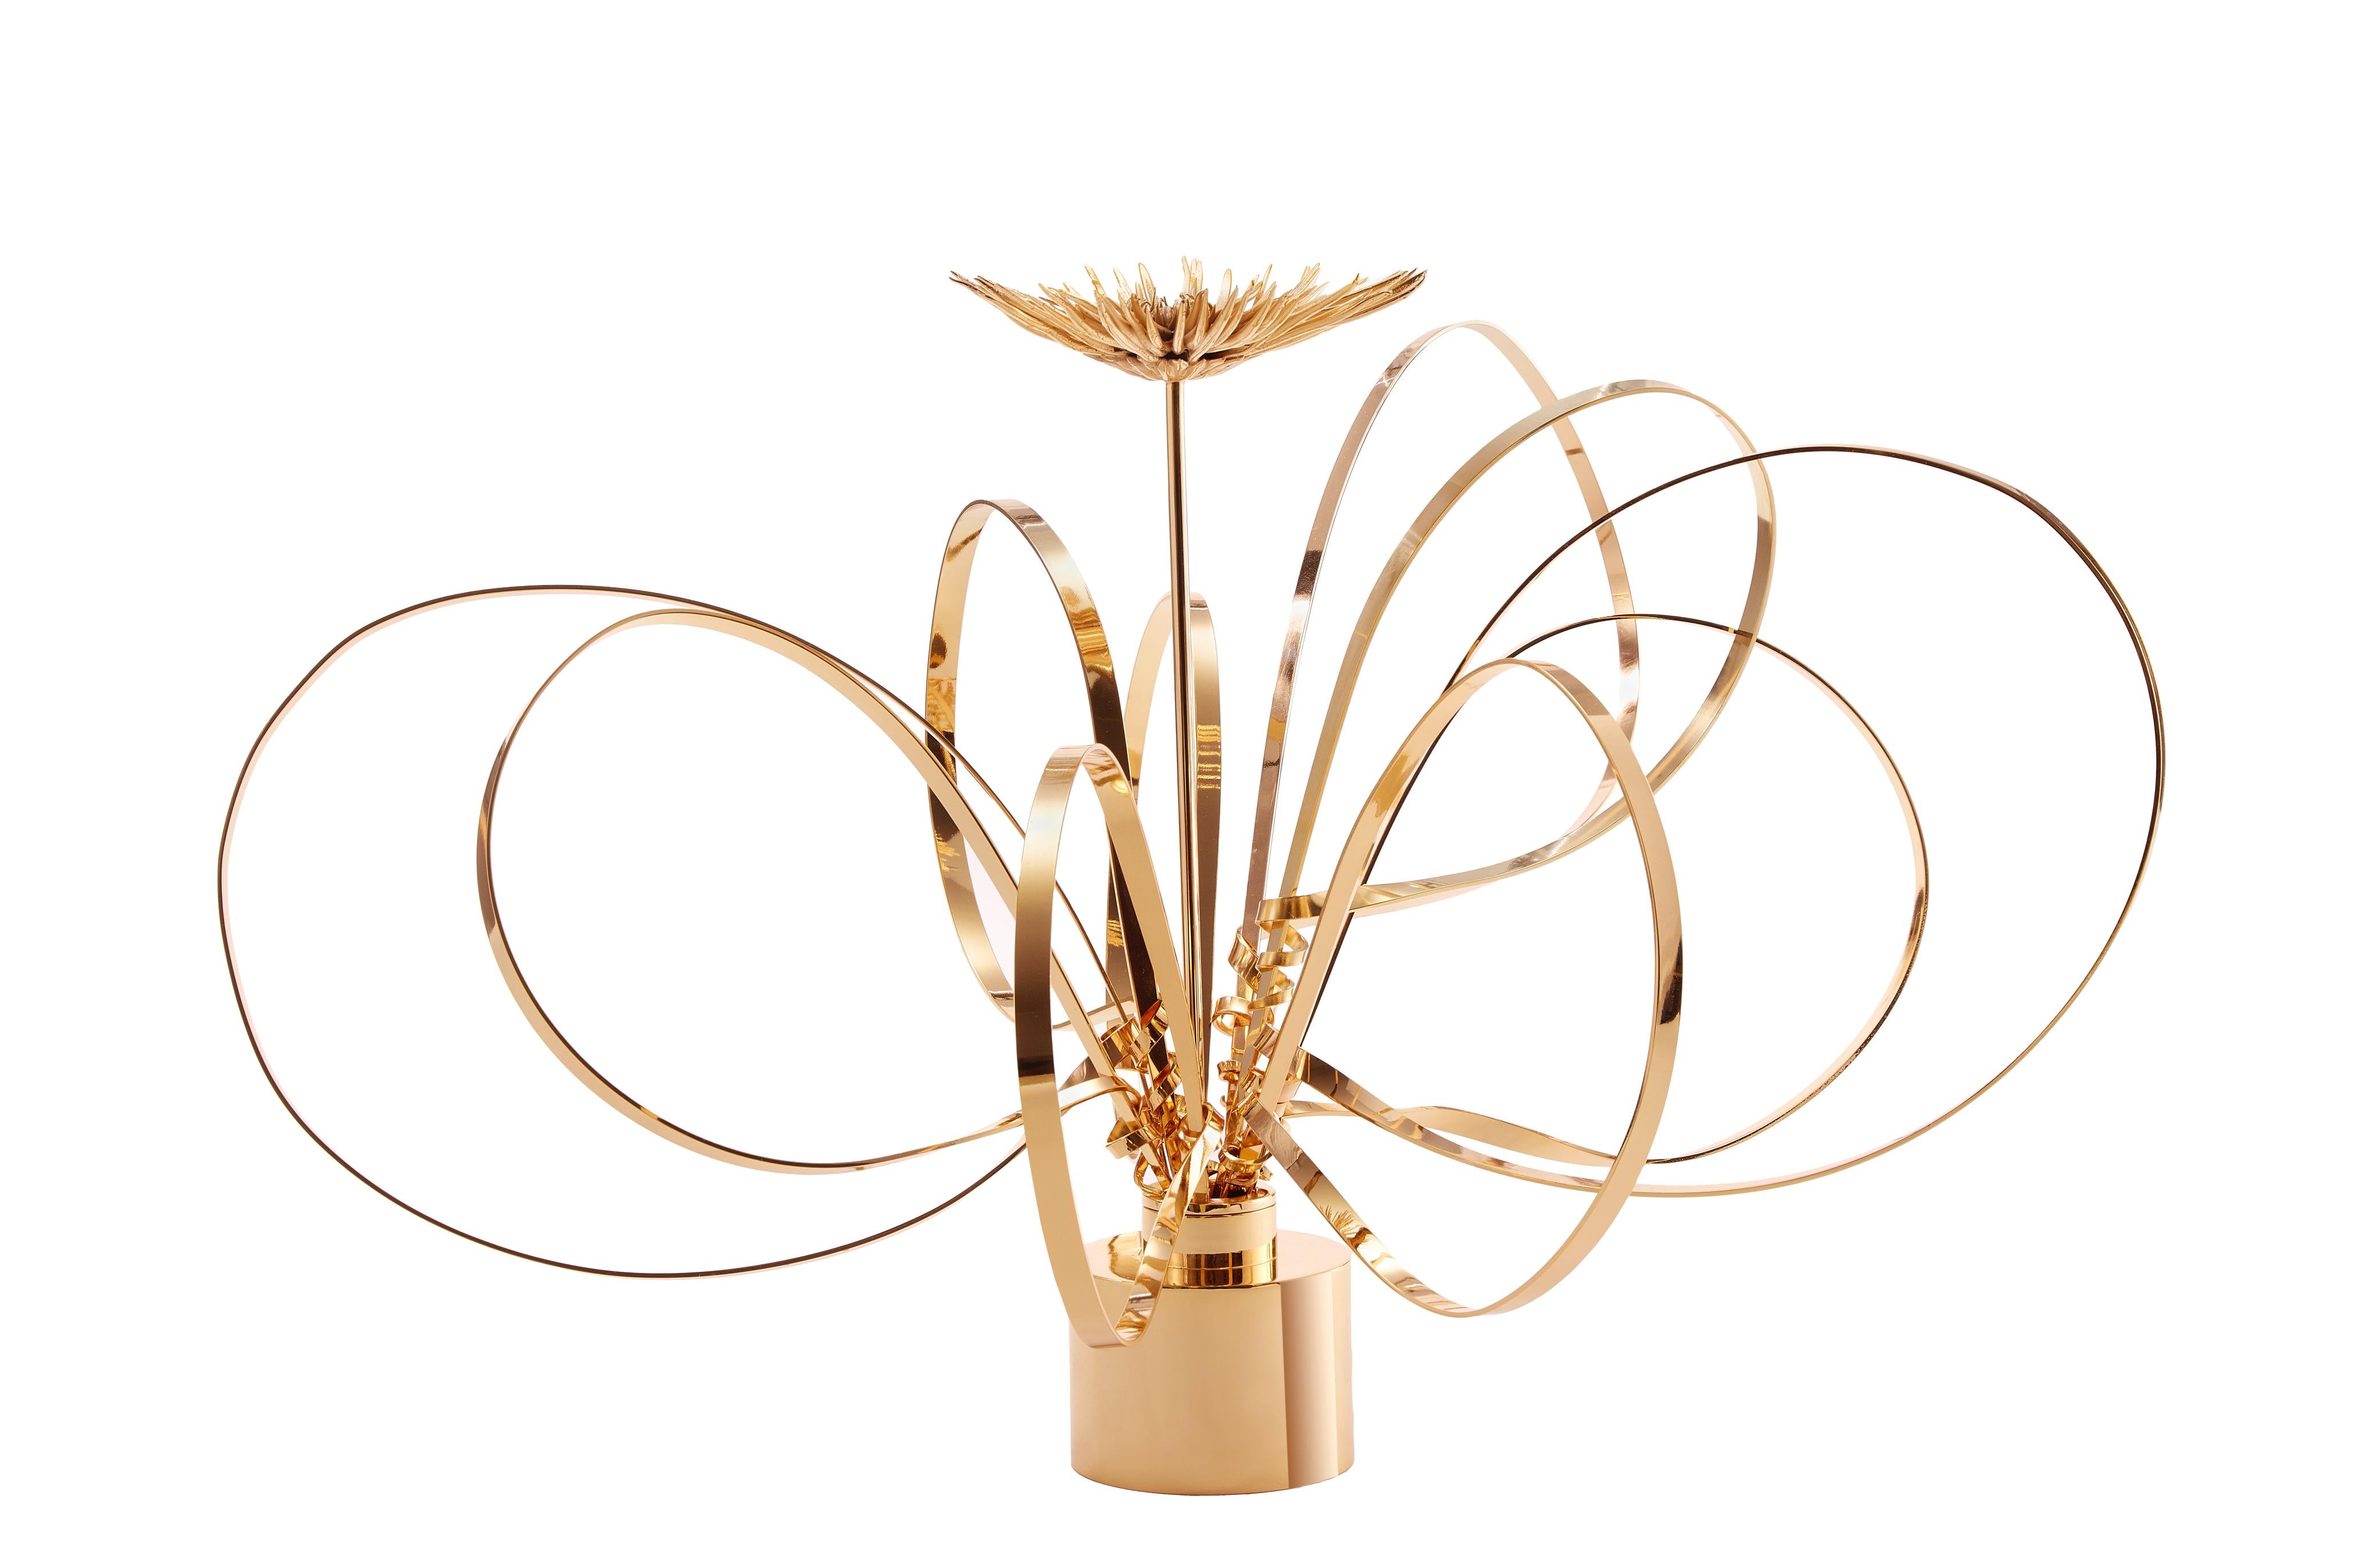 Golden swirls and mum by Art Flower Maker
Unique Piece.
Dimensions: Ø 59 x H 33 cm.
Materials: 24 K gold plated brass.

The artistic eye of The Art Flower Maker combined with Italian artisanal metalwork has brought to life these unique pieces